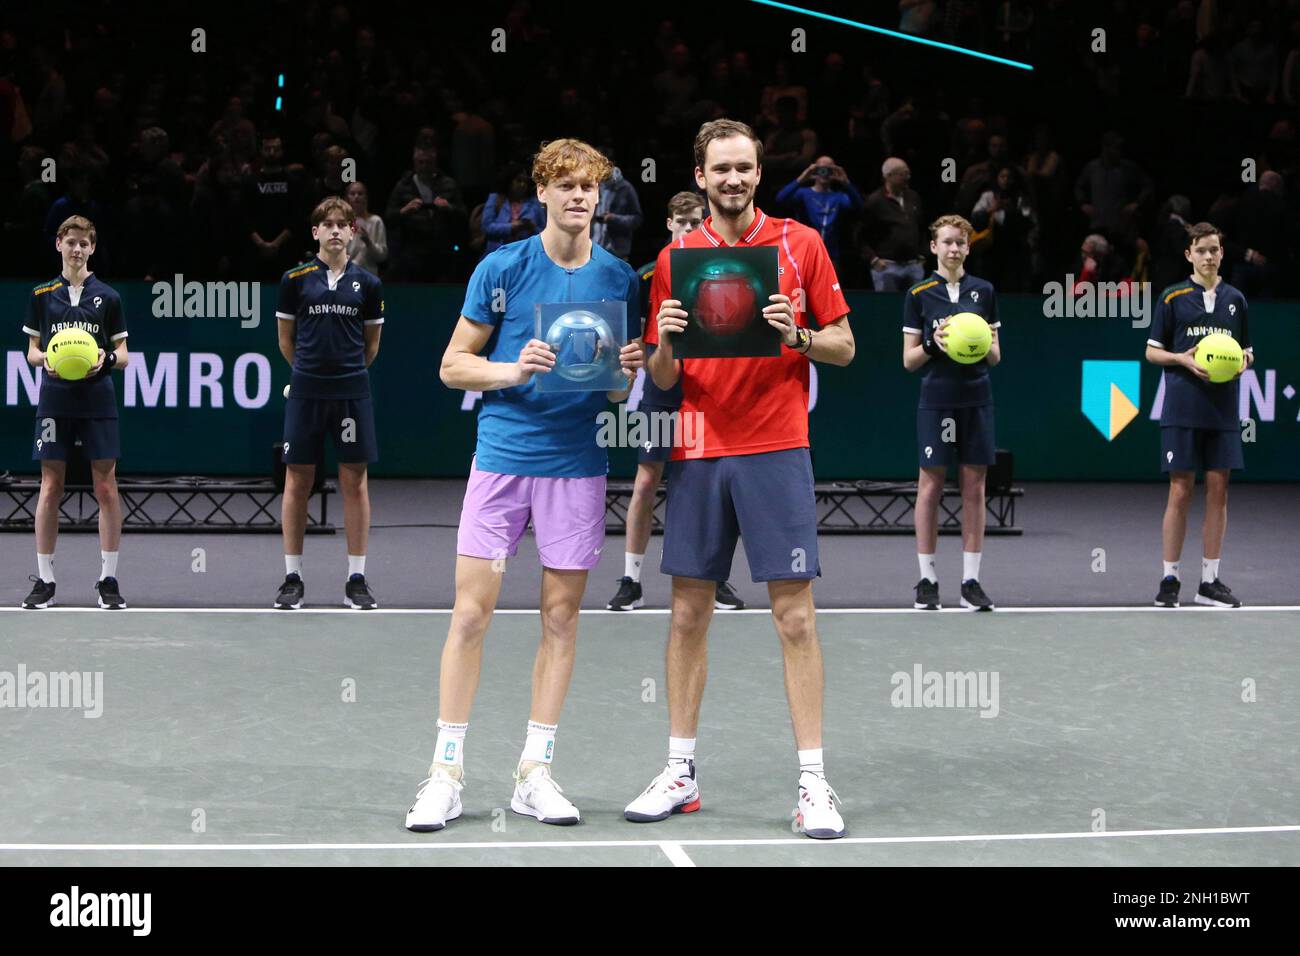 February 19, 2023, Rome, Netherlands Winner Daniil Medvedev of Russia and runner up Jannik Sinner of Italy after the final of the ABN Amro Open 2023, ATP 500 tennis tournament on February